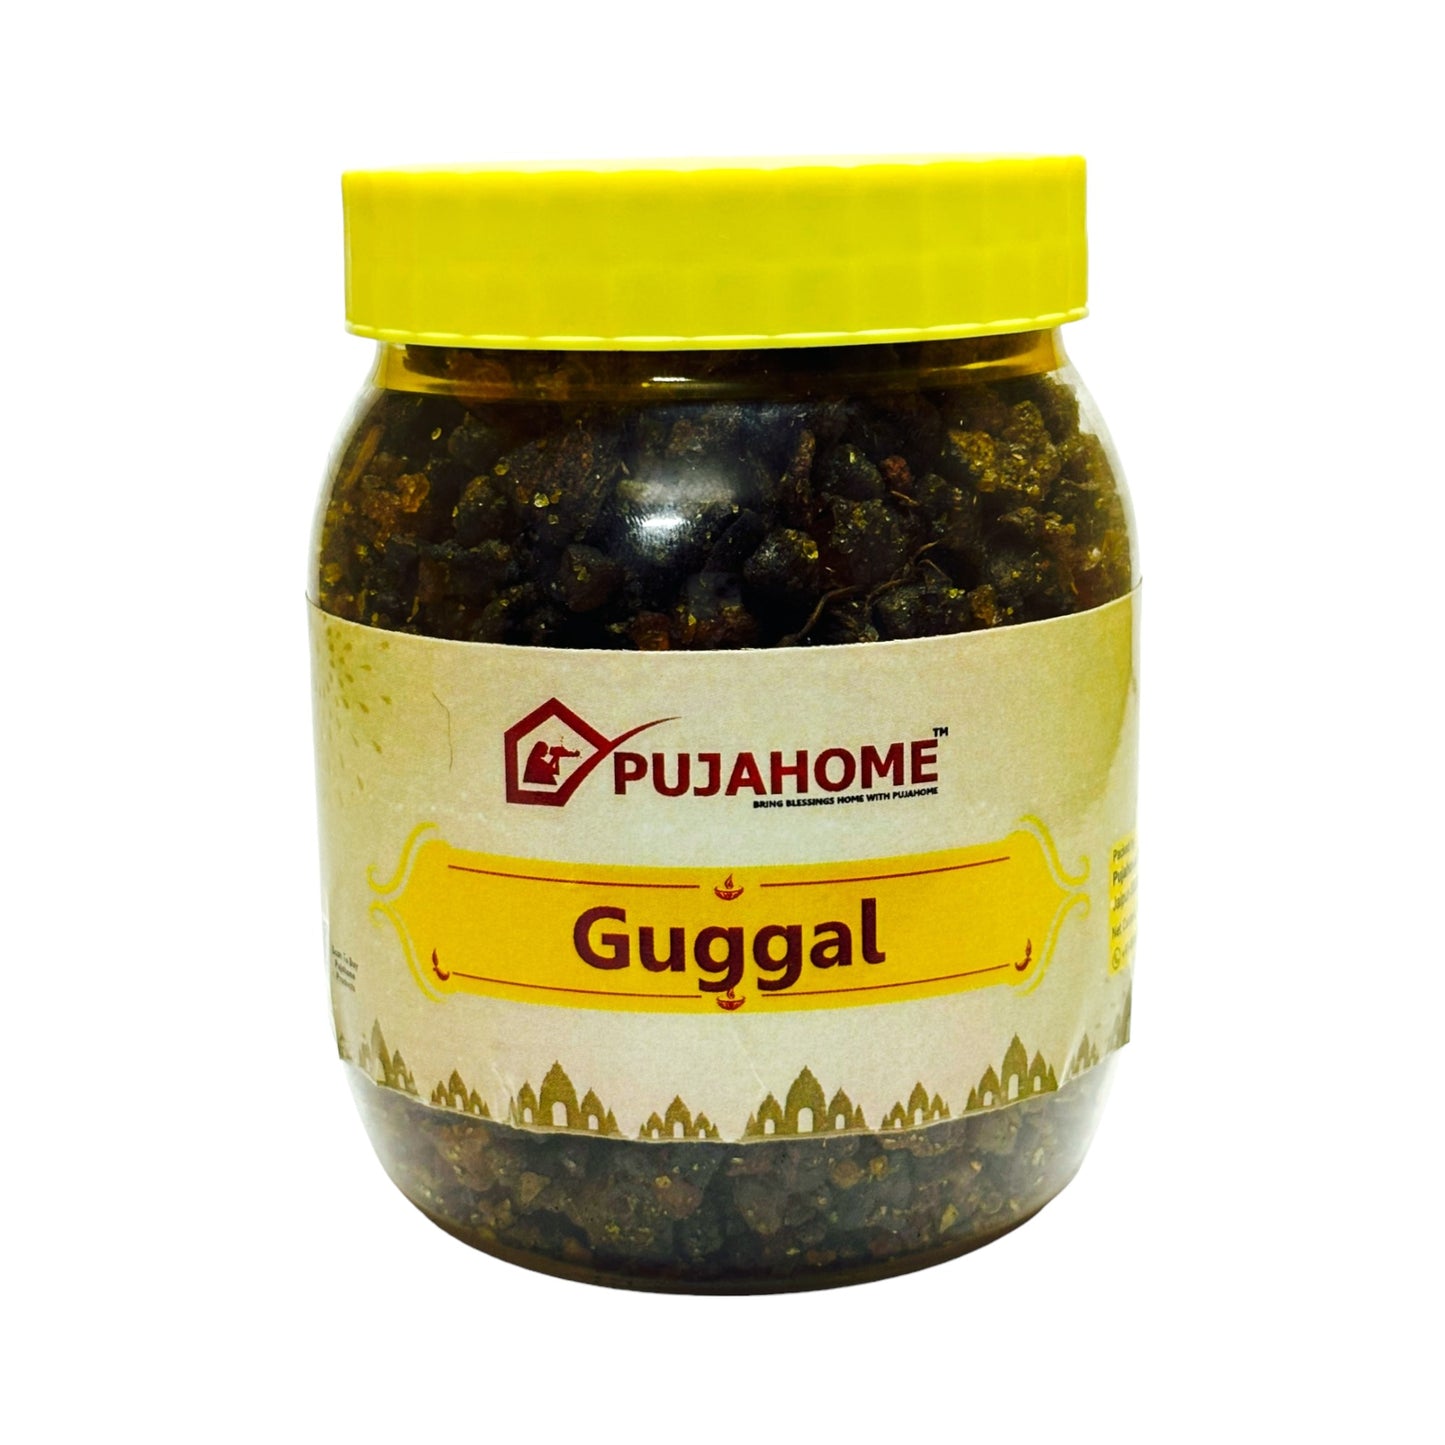 Pujahome Guggal (Pure, Natural) Commiphora Guggal (250 gram Box)